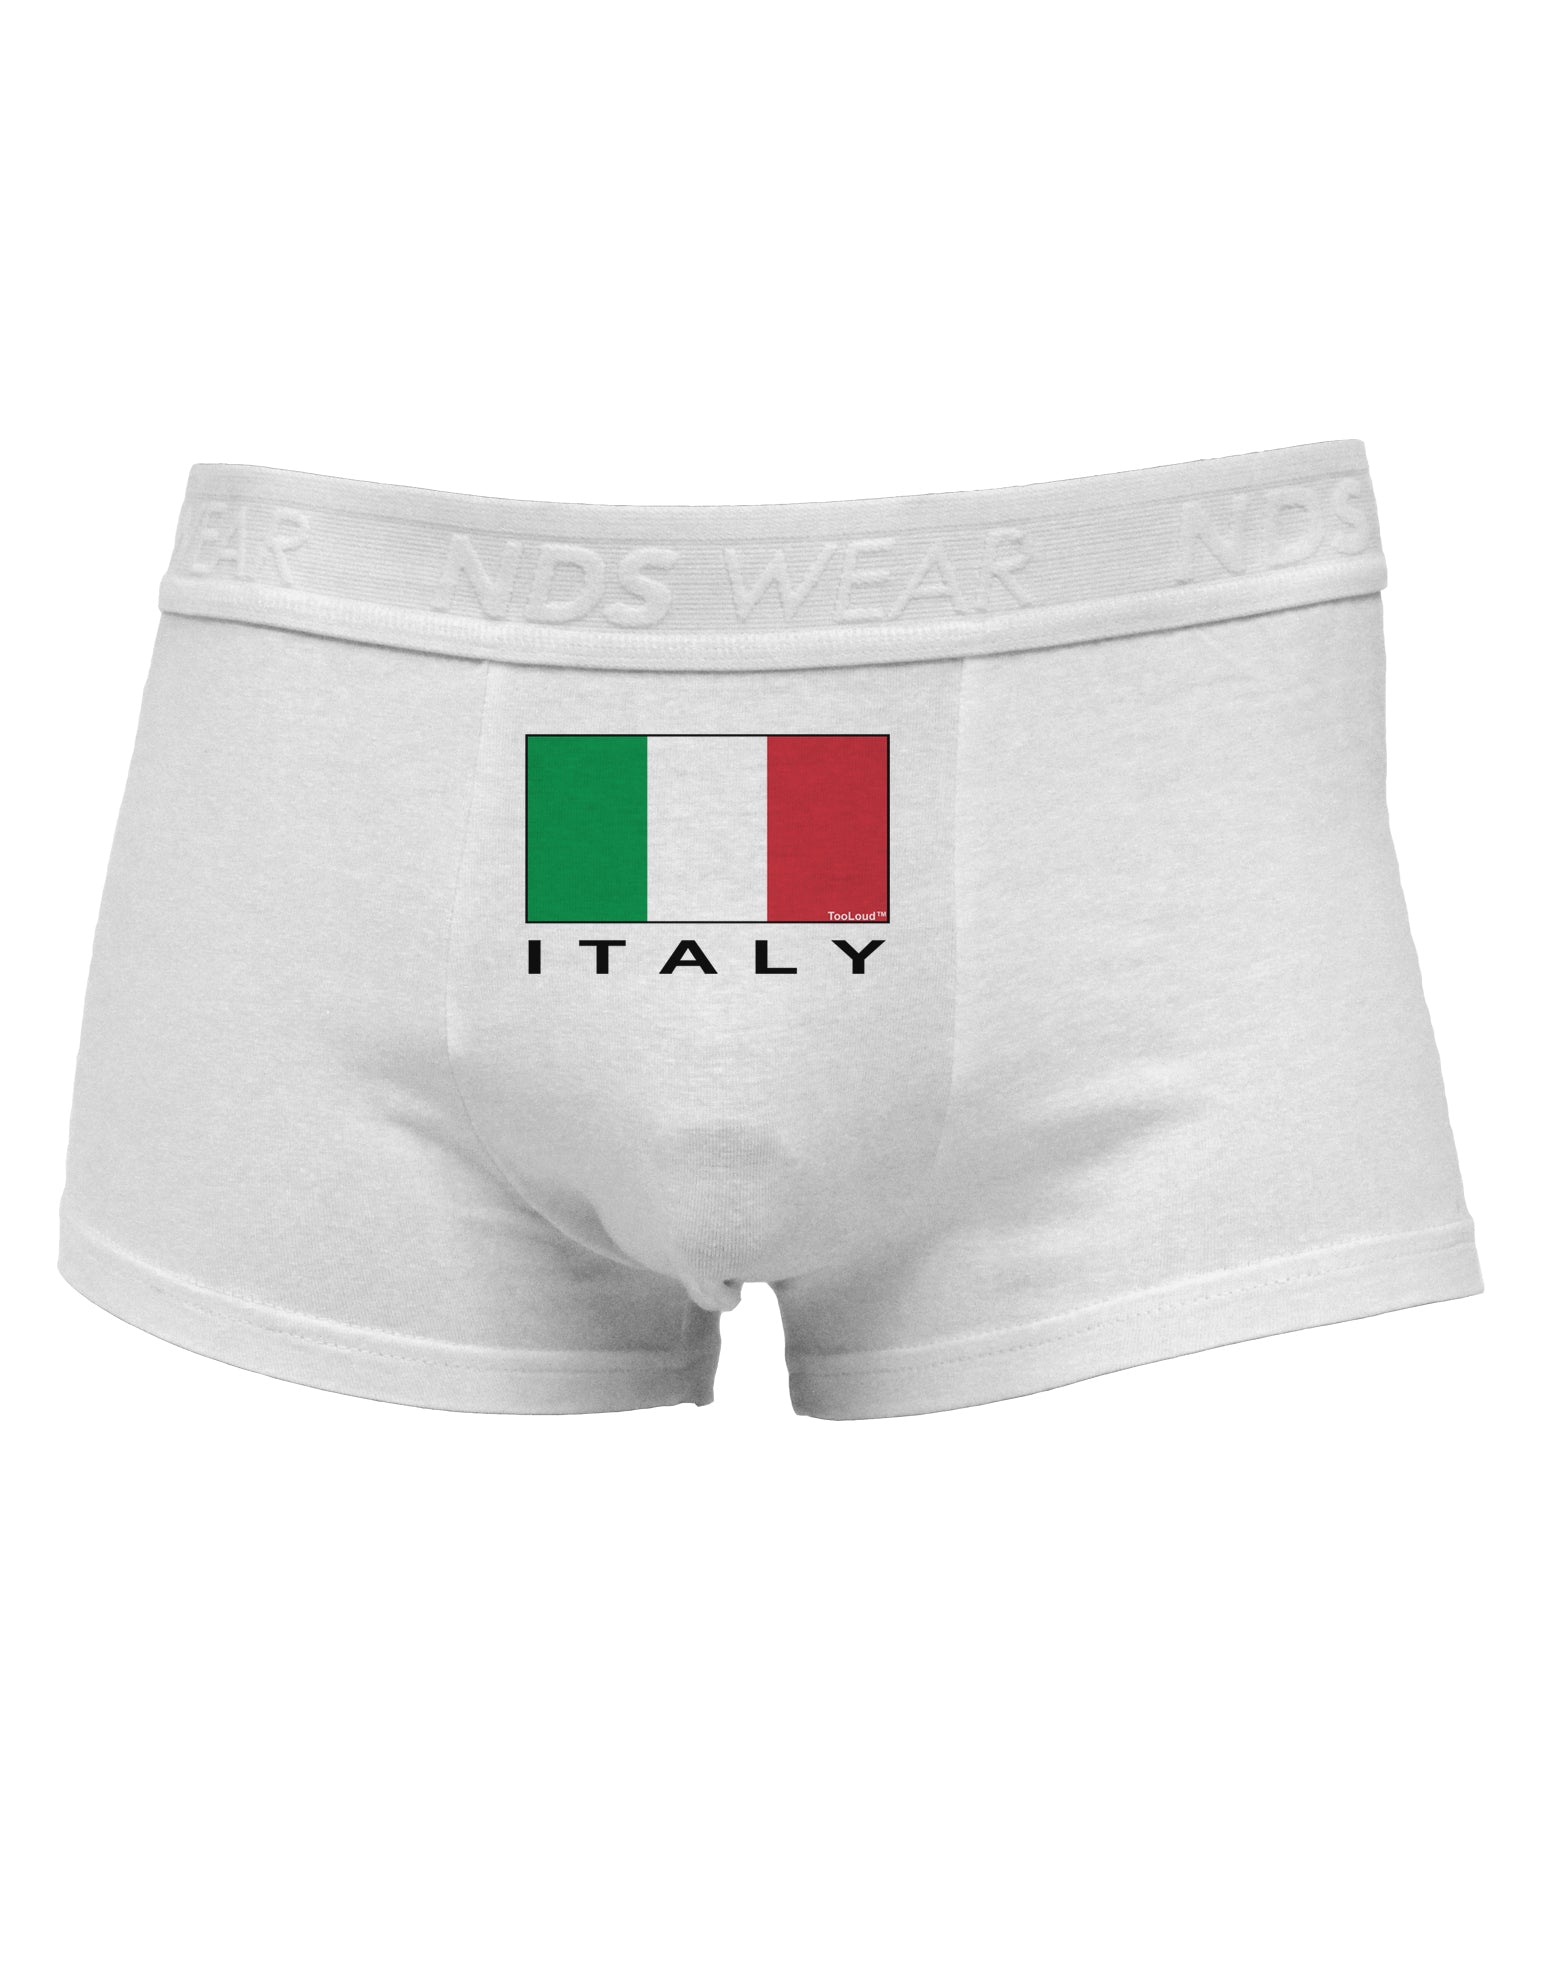 Italian Flag - Italy Text Mens Cotton Trunk Underwear by TooLoud